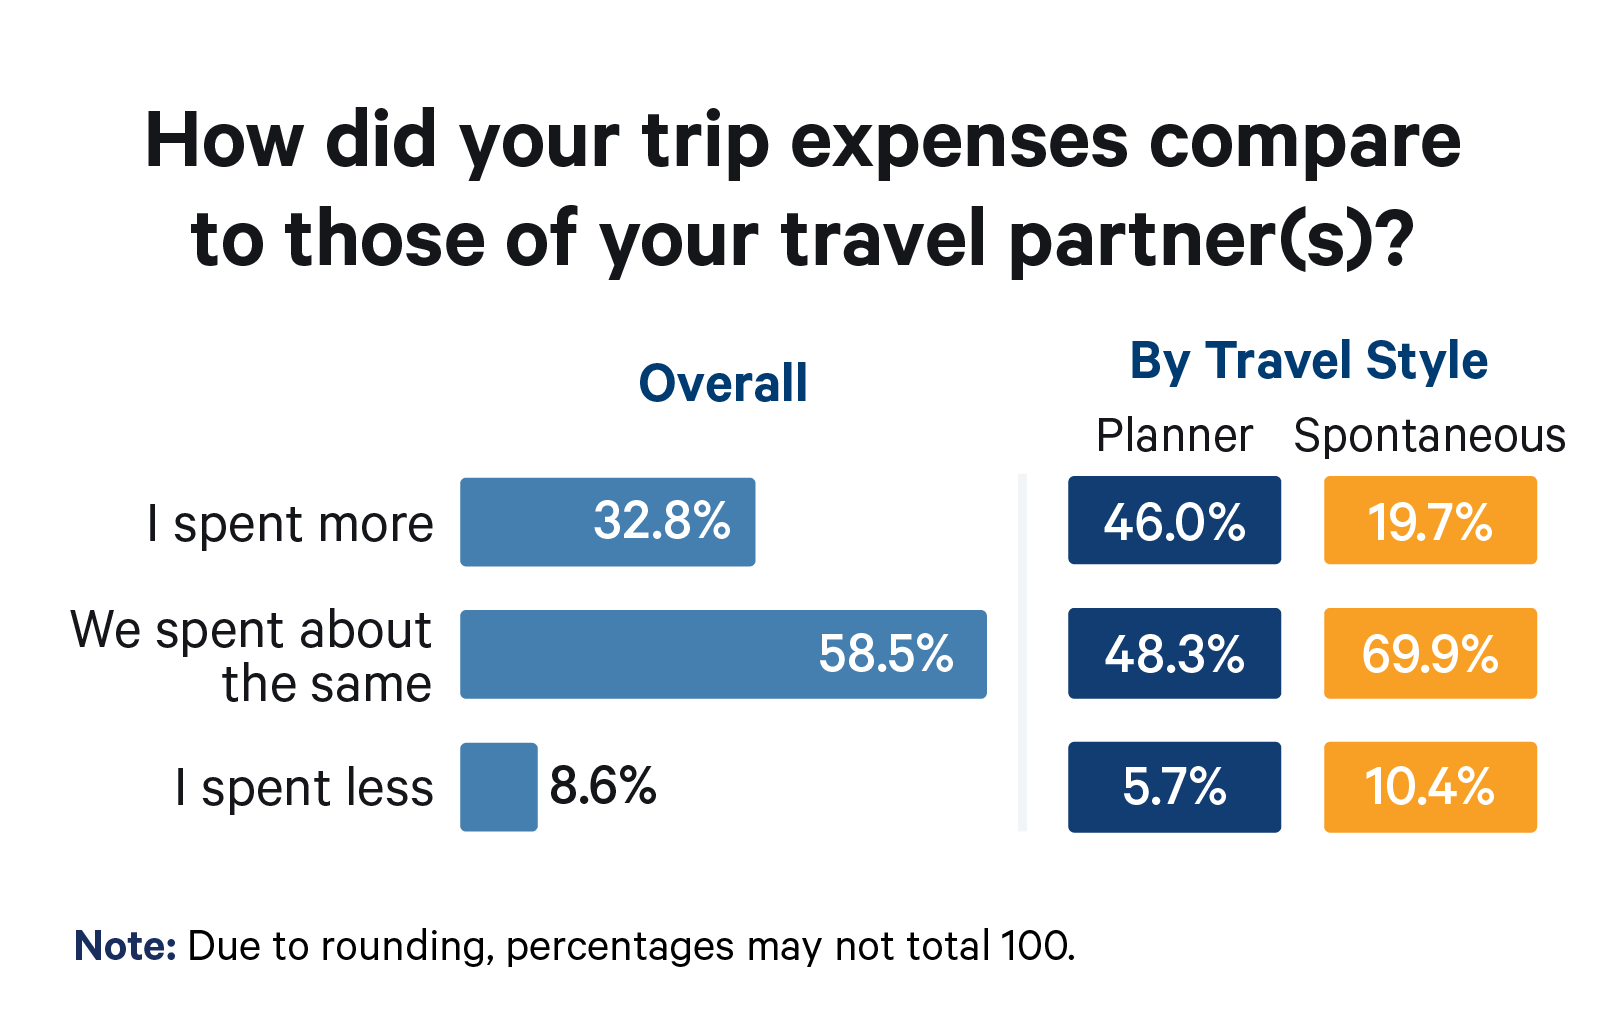 Percentages on trip expenses compared to travel partner by travel style